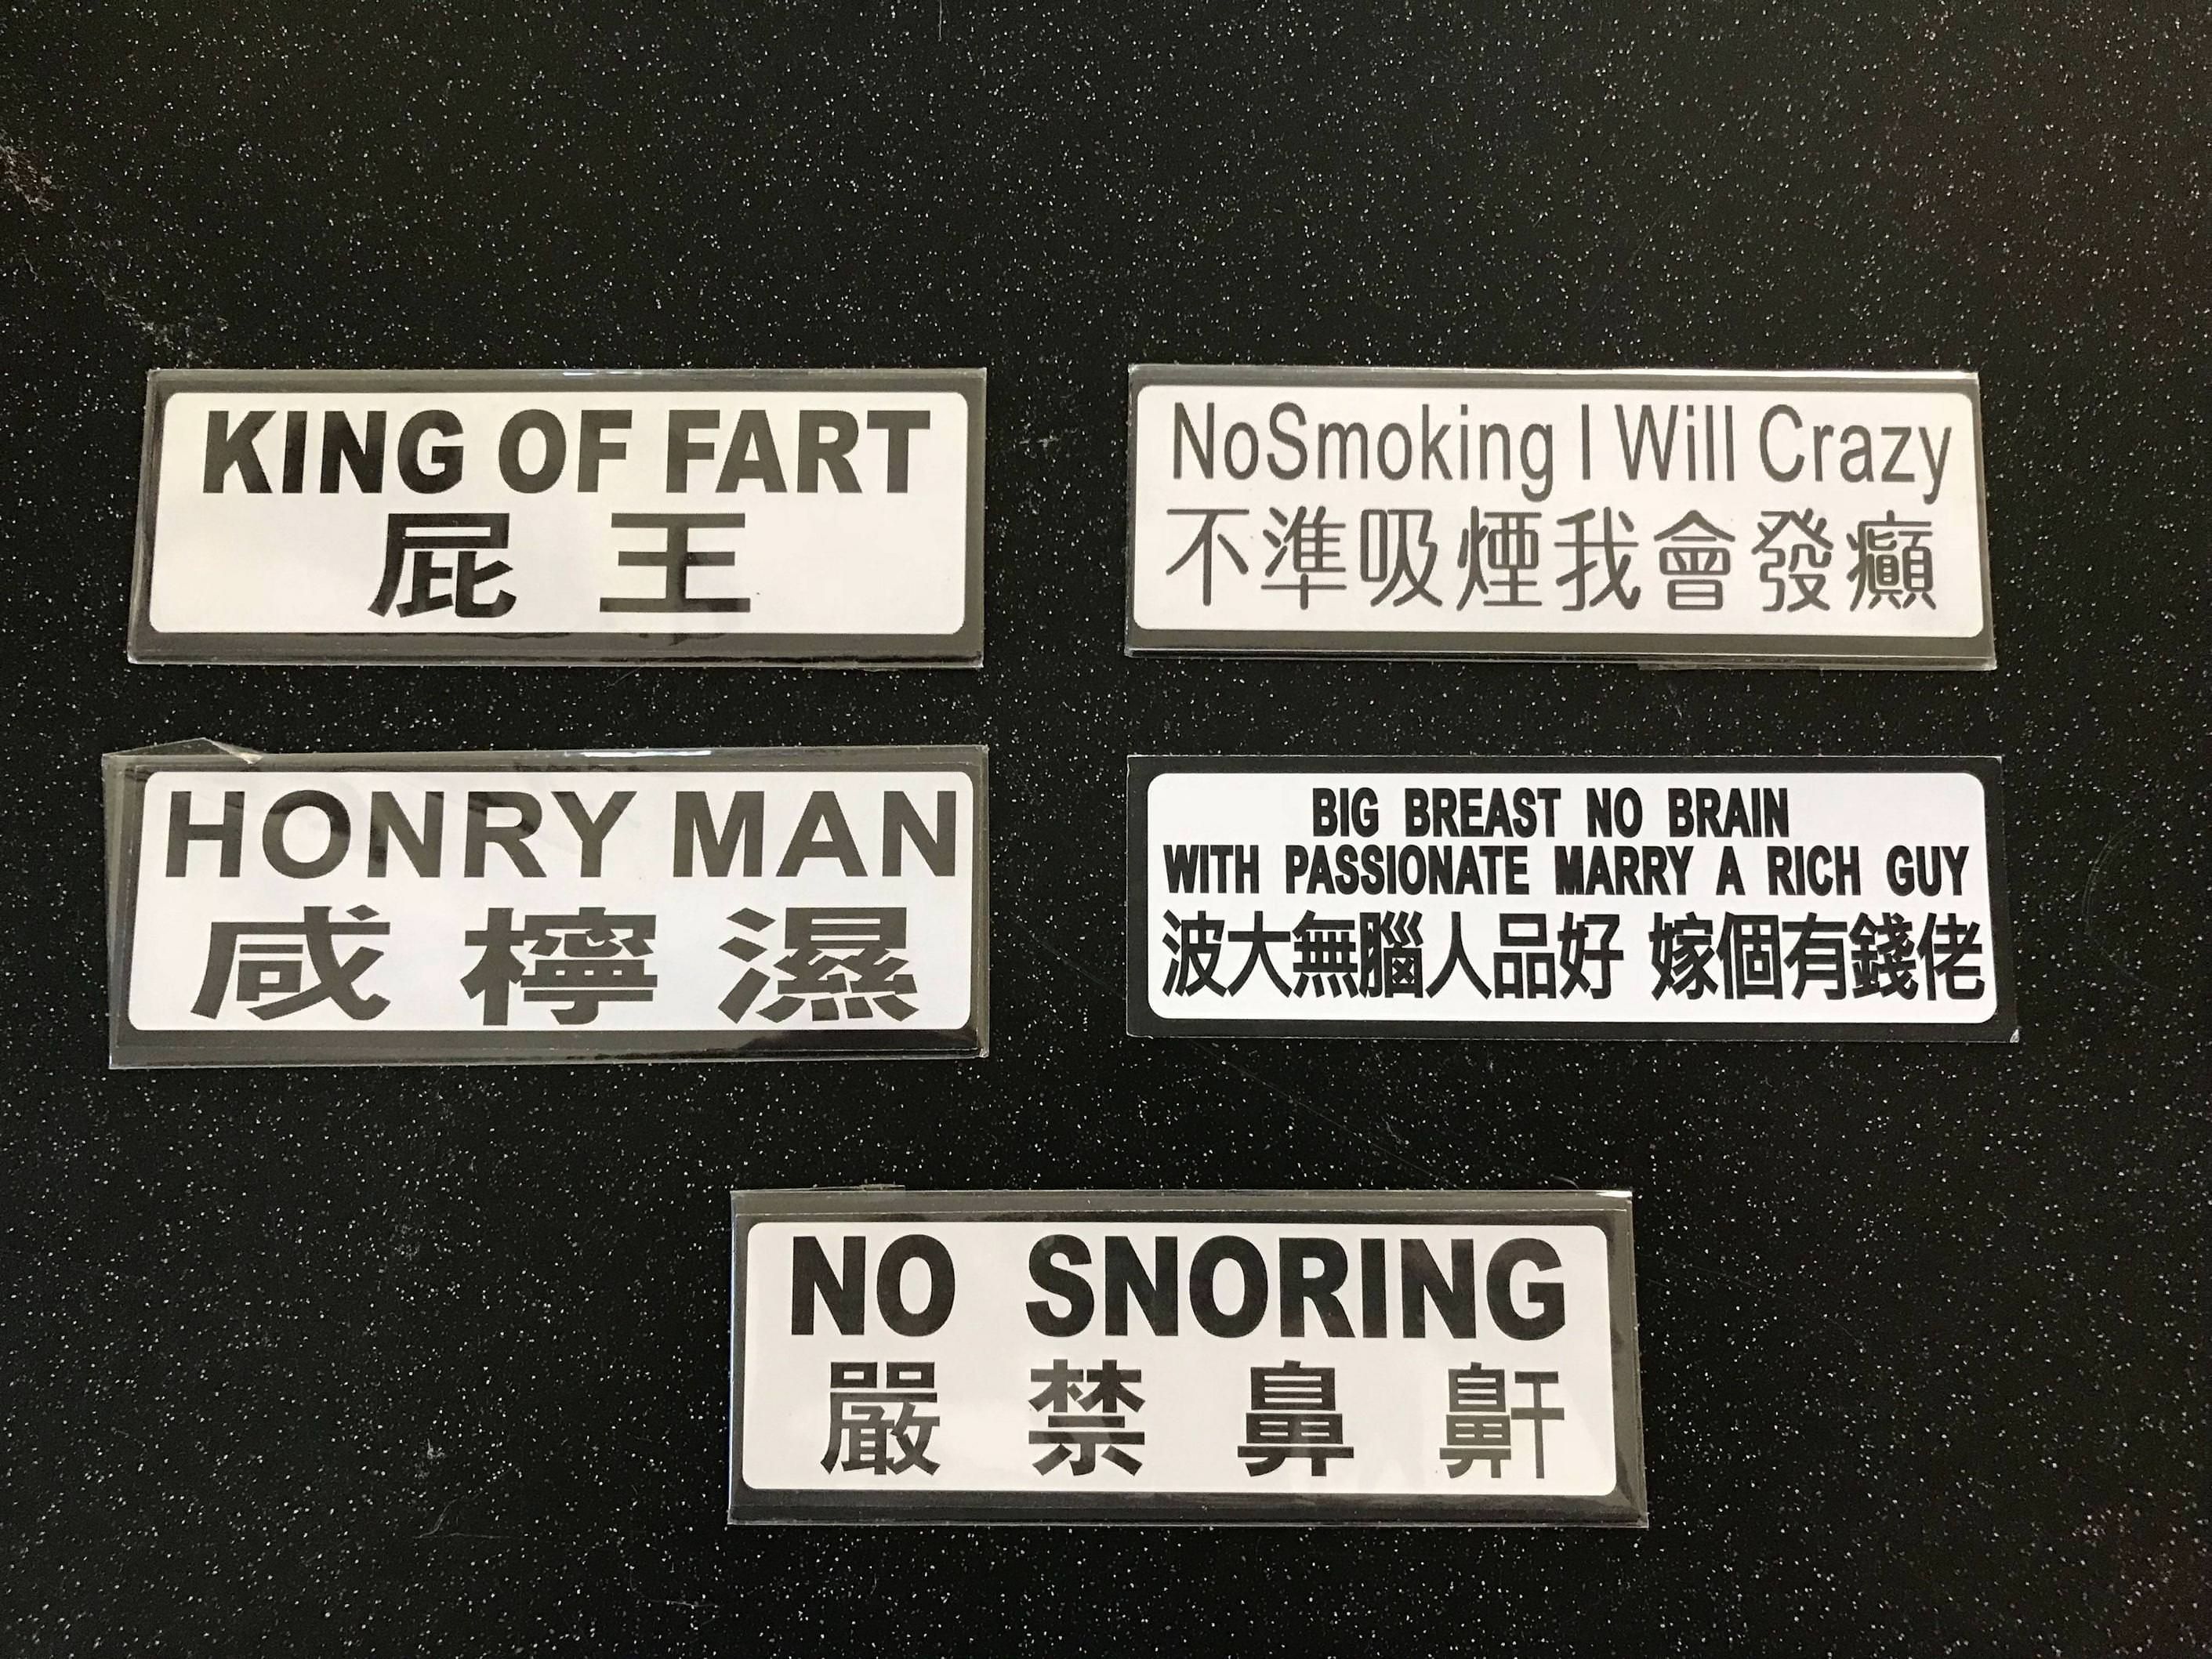 These magnets my friend brought back from China